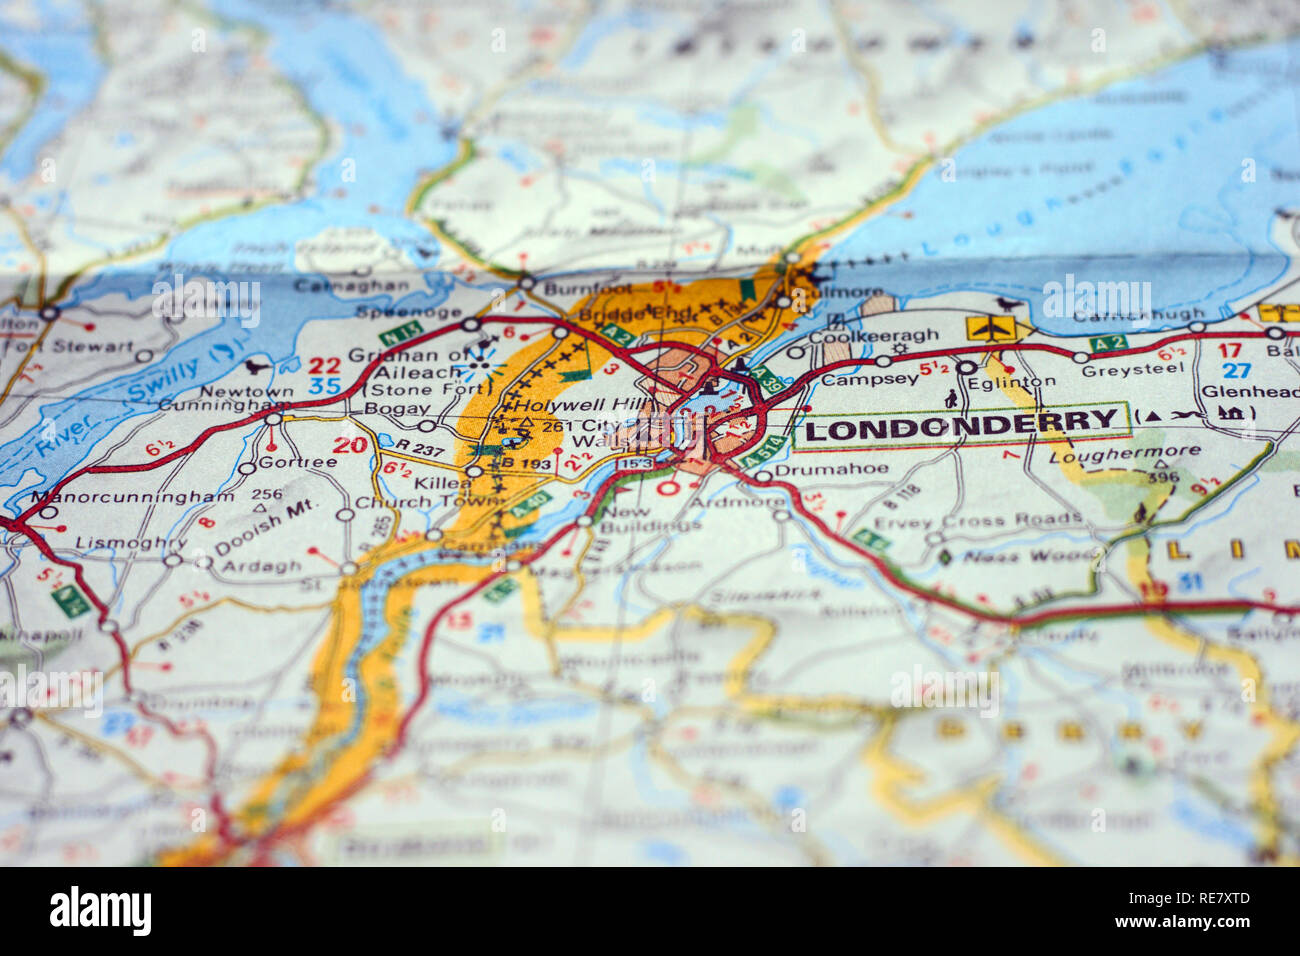 Selectively focused city of Londonderry on a paper map with border between Norhern Ireland and Irish Republic Stock Photo